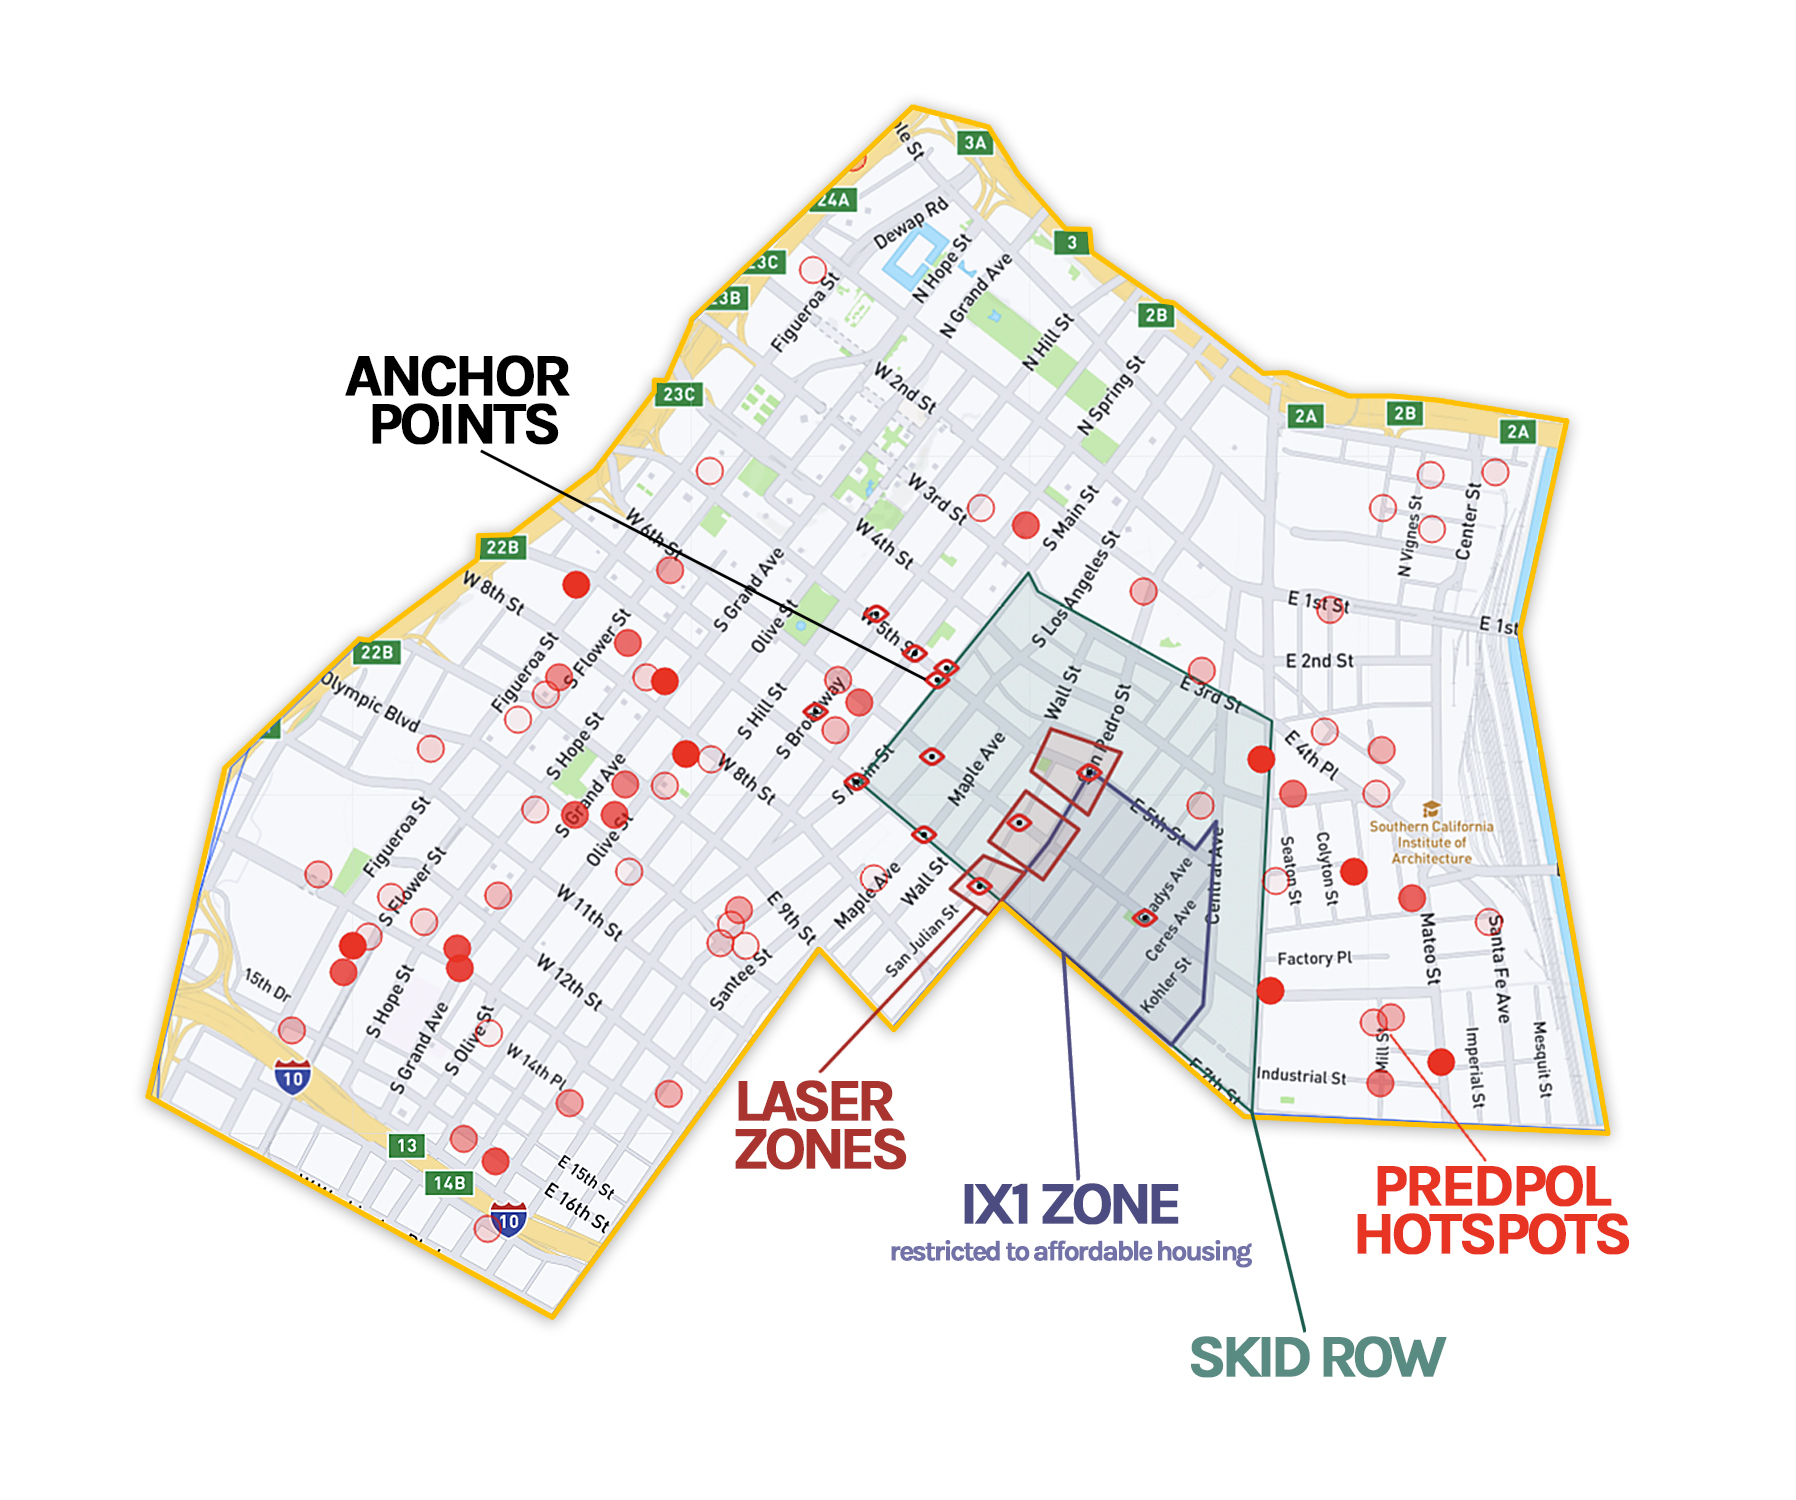 A map of all the data driven policing programs in central division with boundaries around skid row and the proposed ix1 zone (proposed deed restriction for affordable housing)